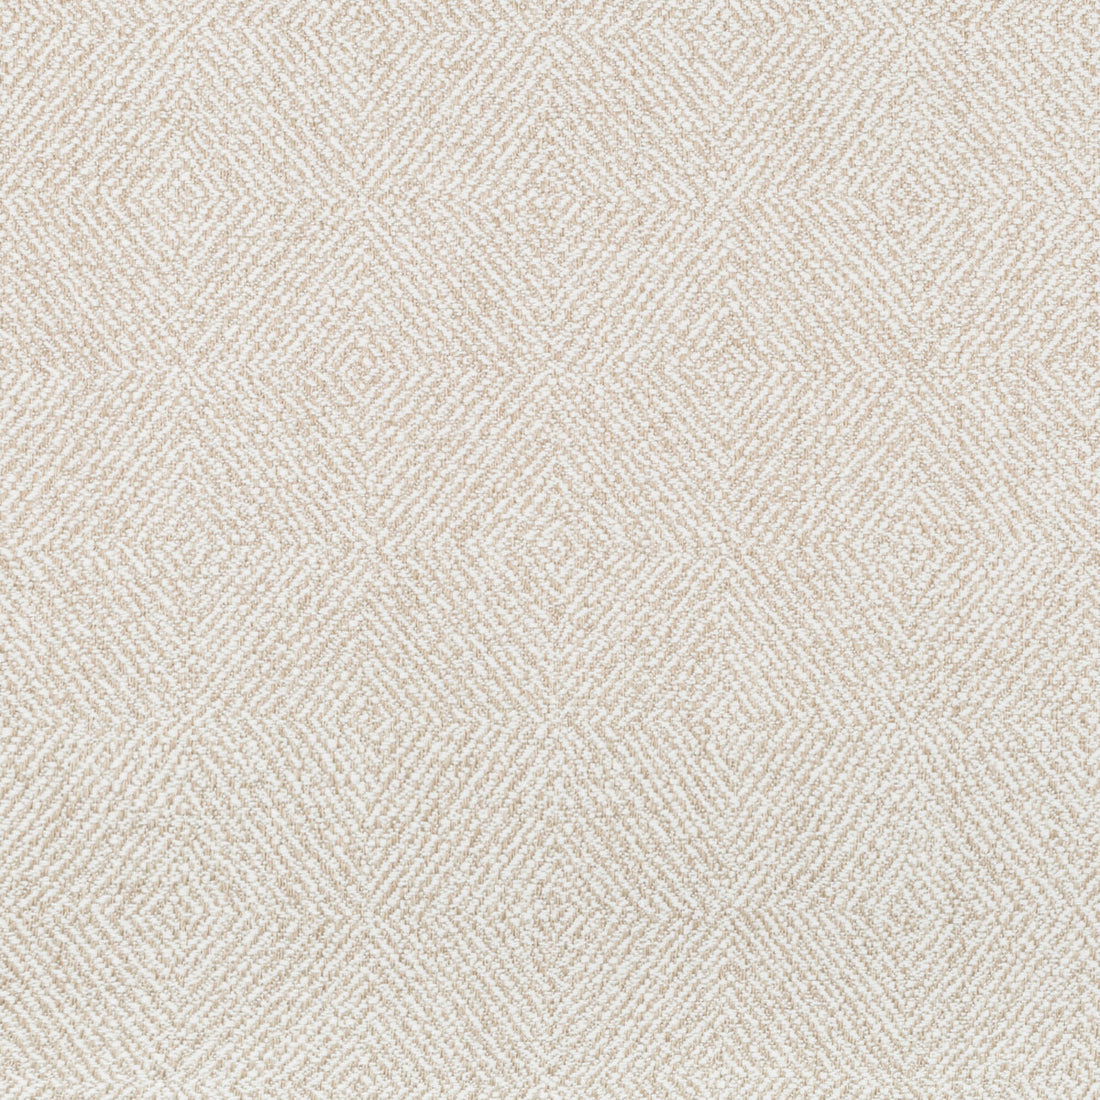 Egress fabric in dune color - pattern 35747.16.0 - by Kravet Couture in the Vista collection